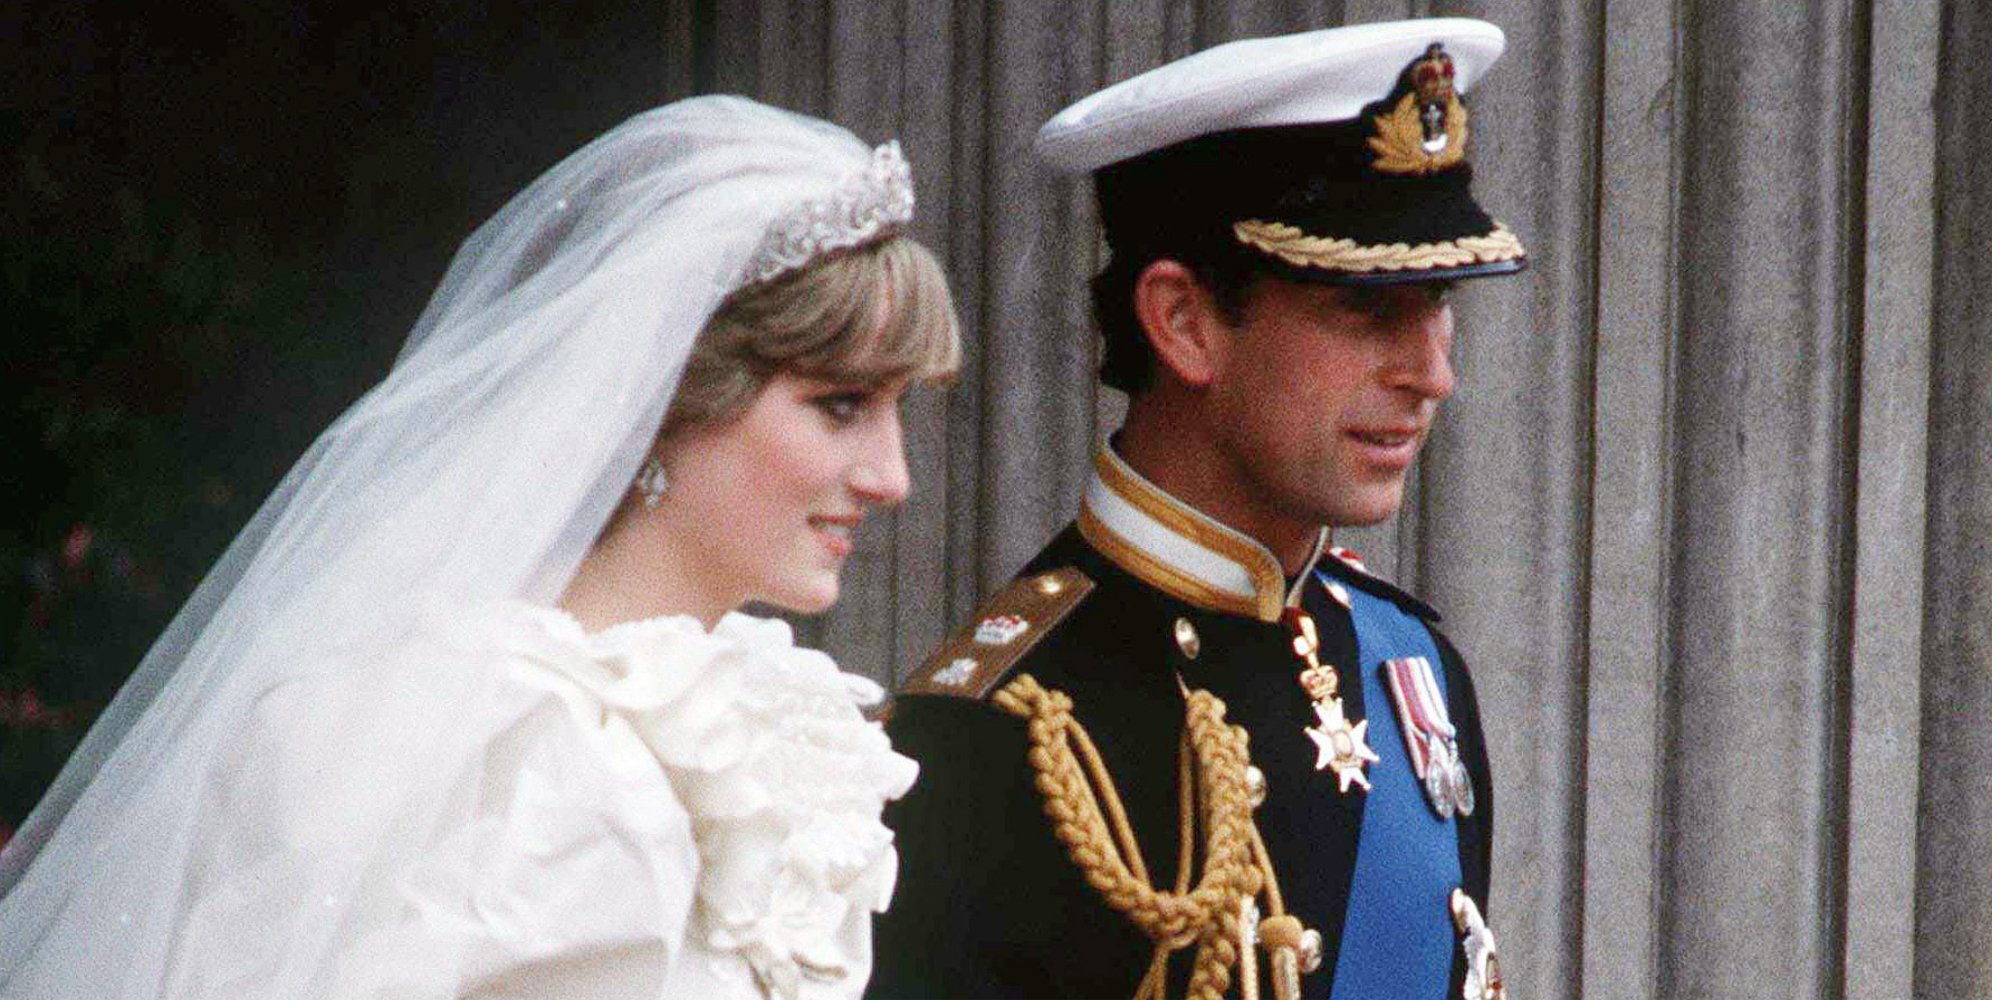 Princess Diana and Prince Charles wedding took place in July 1981 and was celebrated with a royal breakfast.